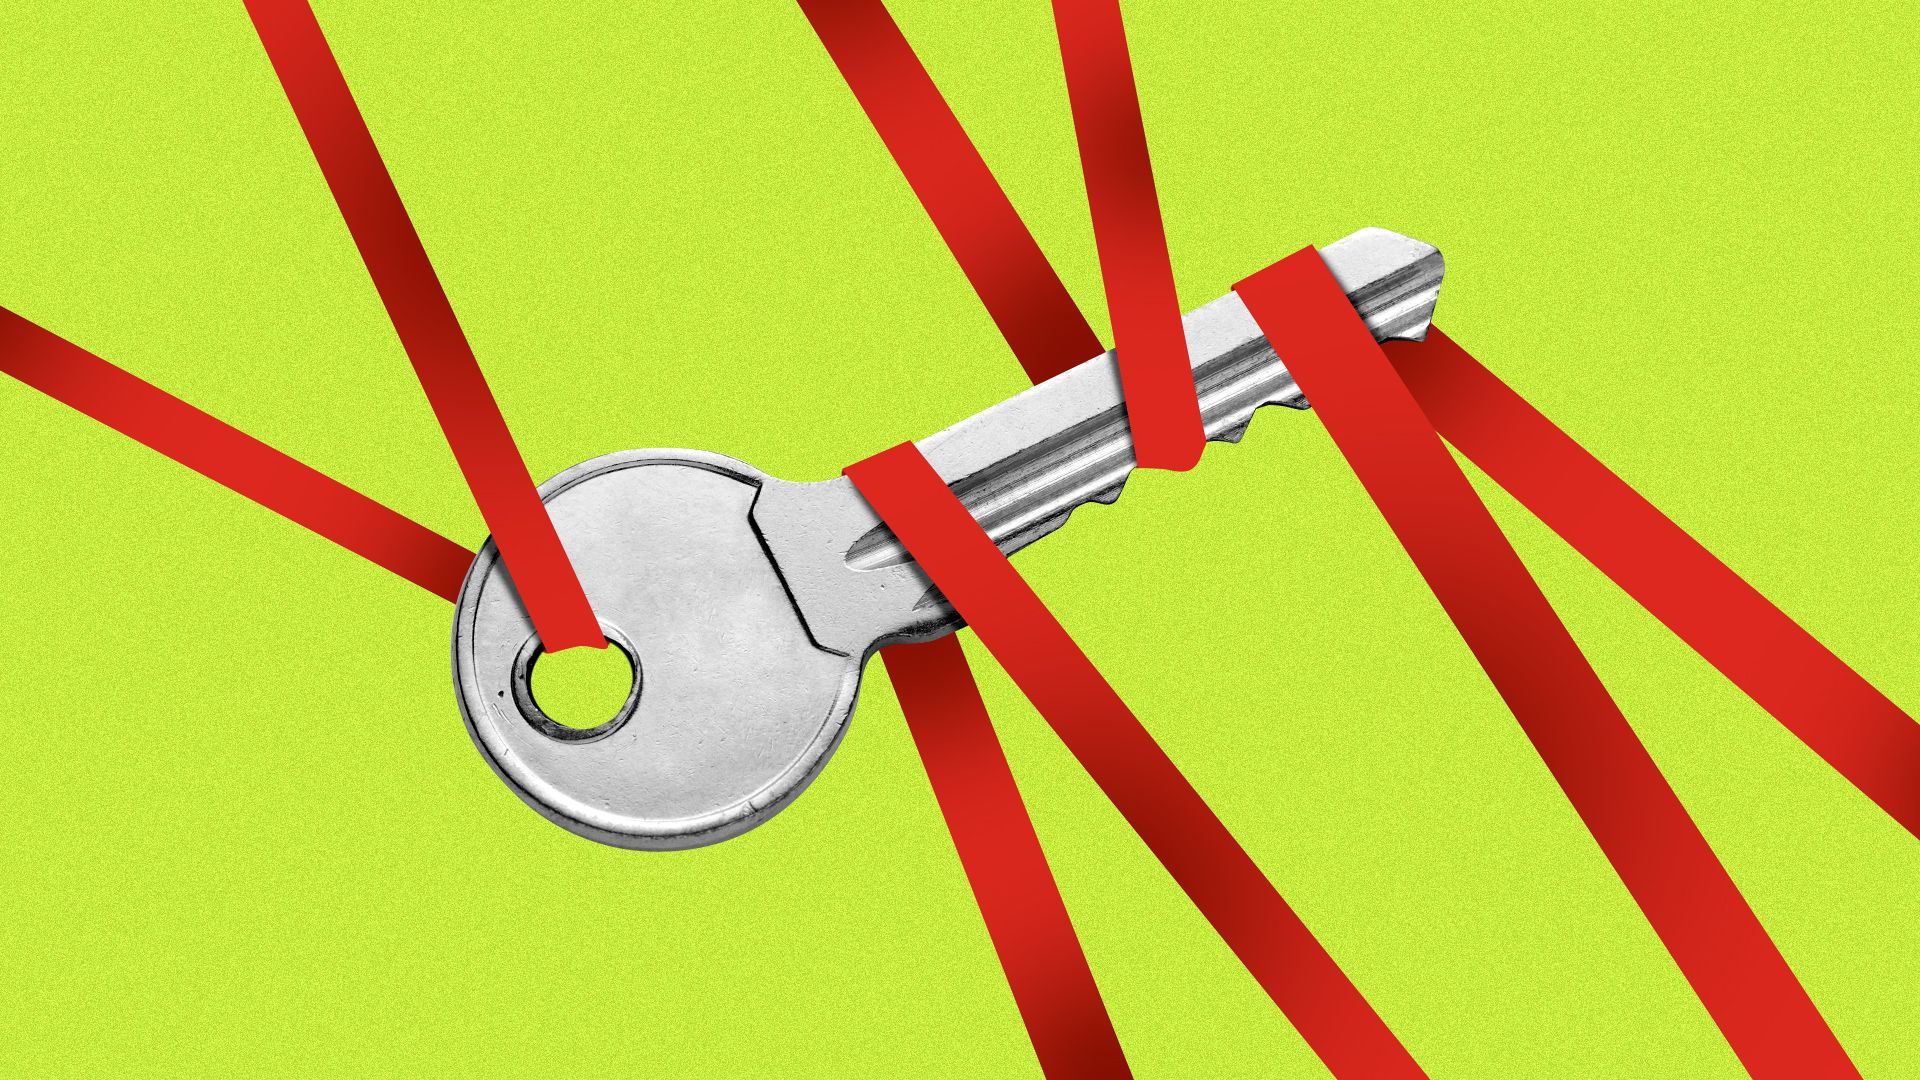 Illustration of a key suspended in mid-air by pieces of taught red tape. 